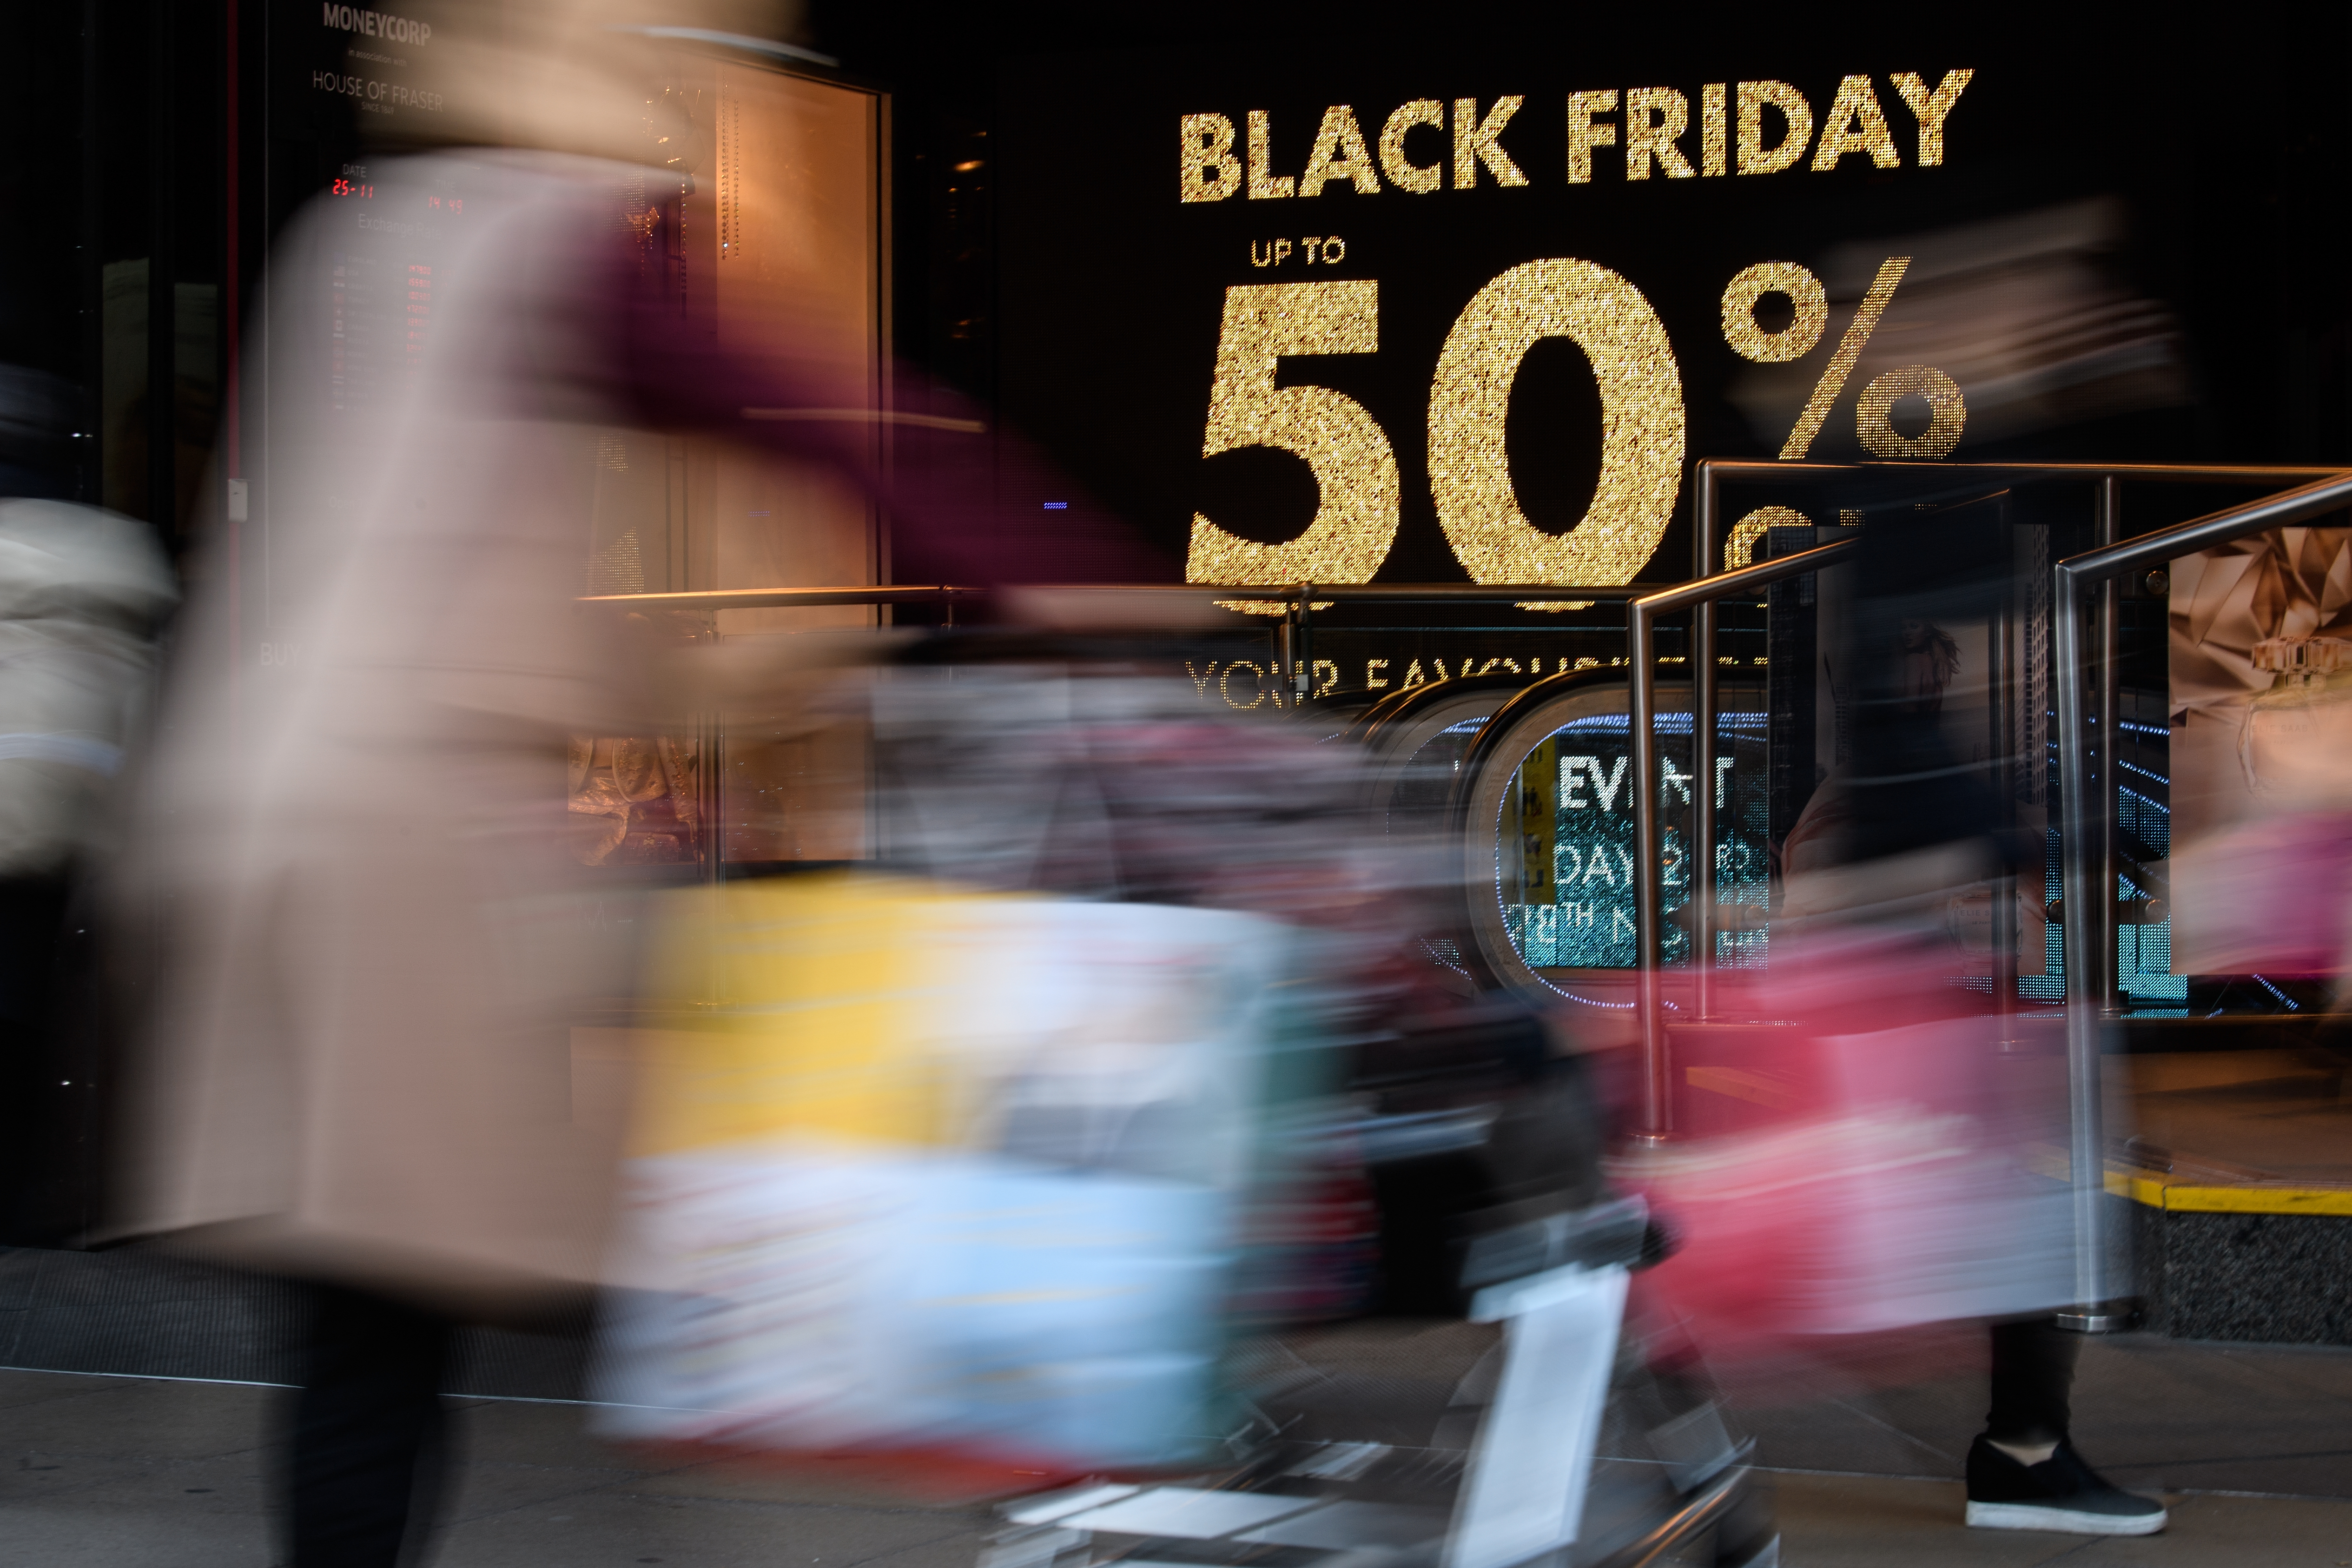 Shoppers carry their purchases on Oxford Street as stores offer discounted items in their "Black Friday" sales on November 25, 2016 in London, England